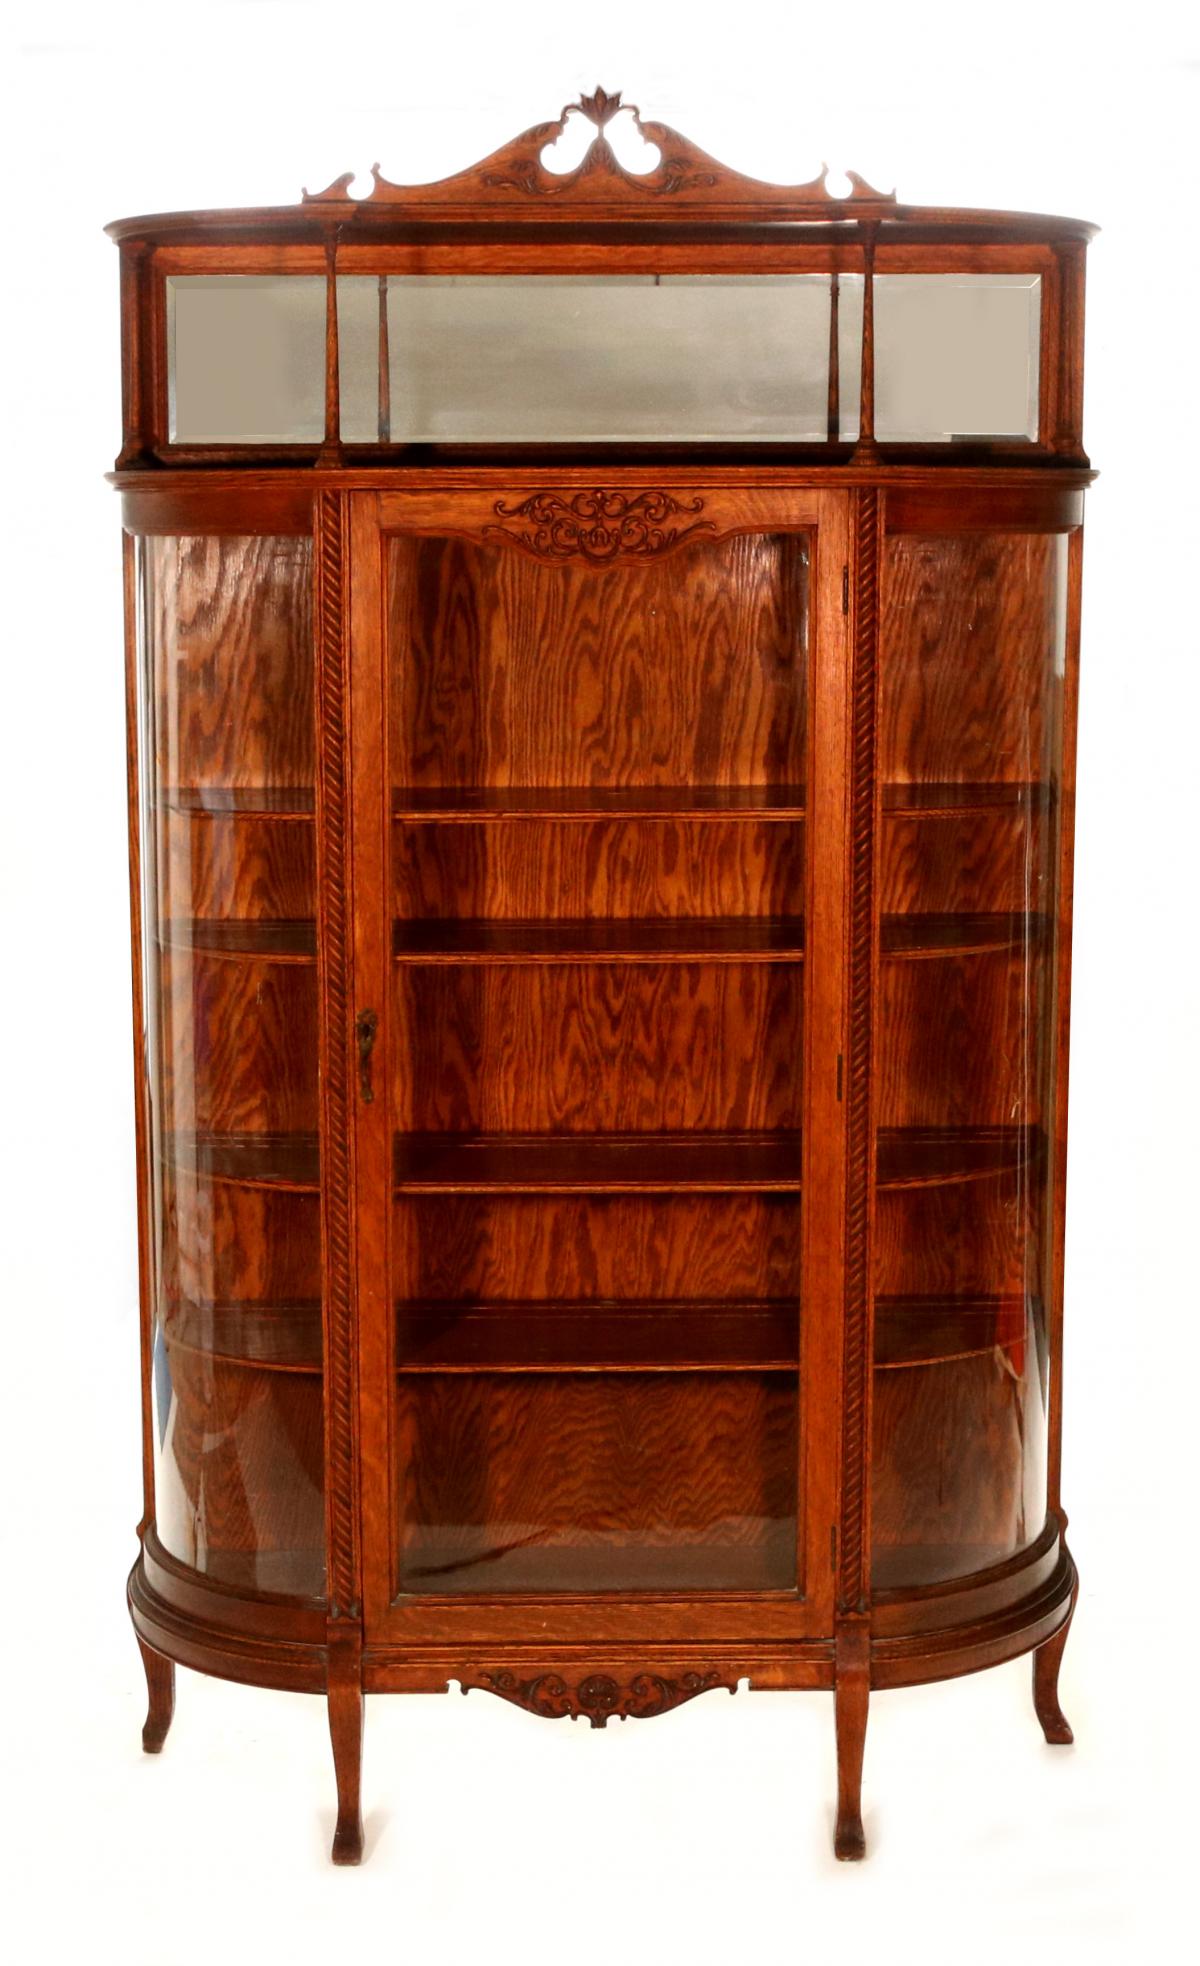 A CURVED OAK CHINA CABINET WITH MIRRORED UPPER